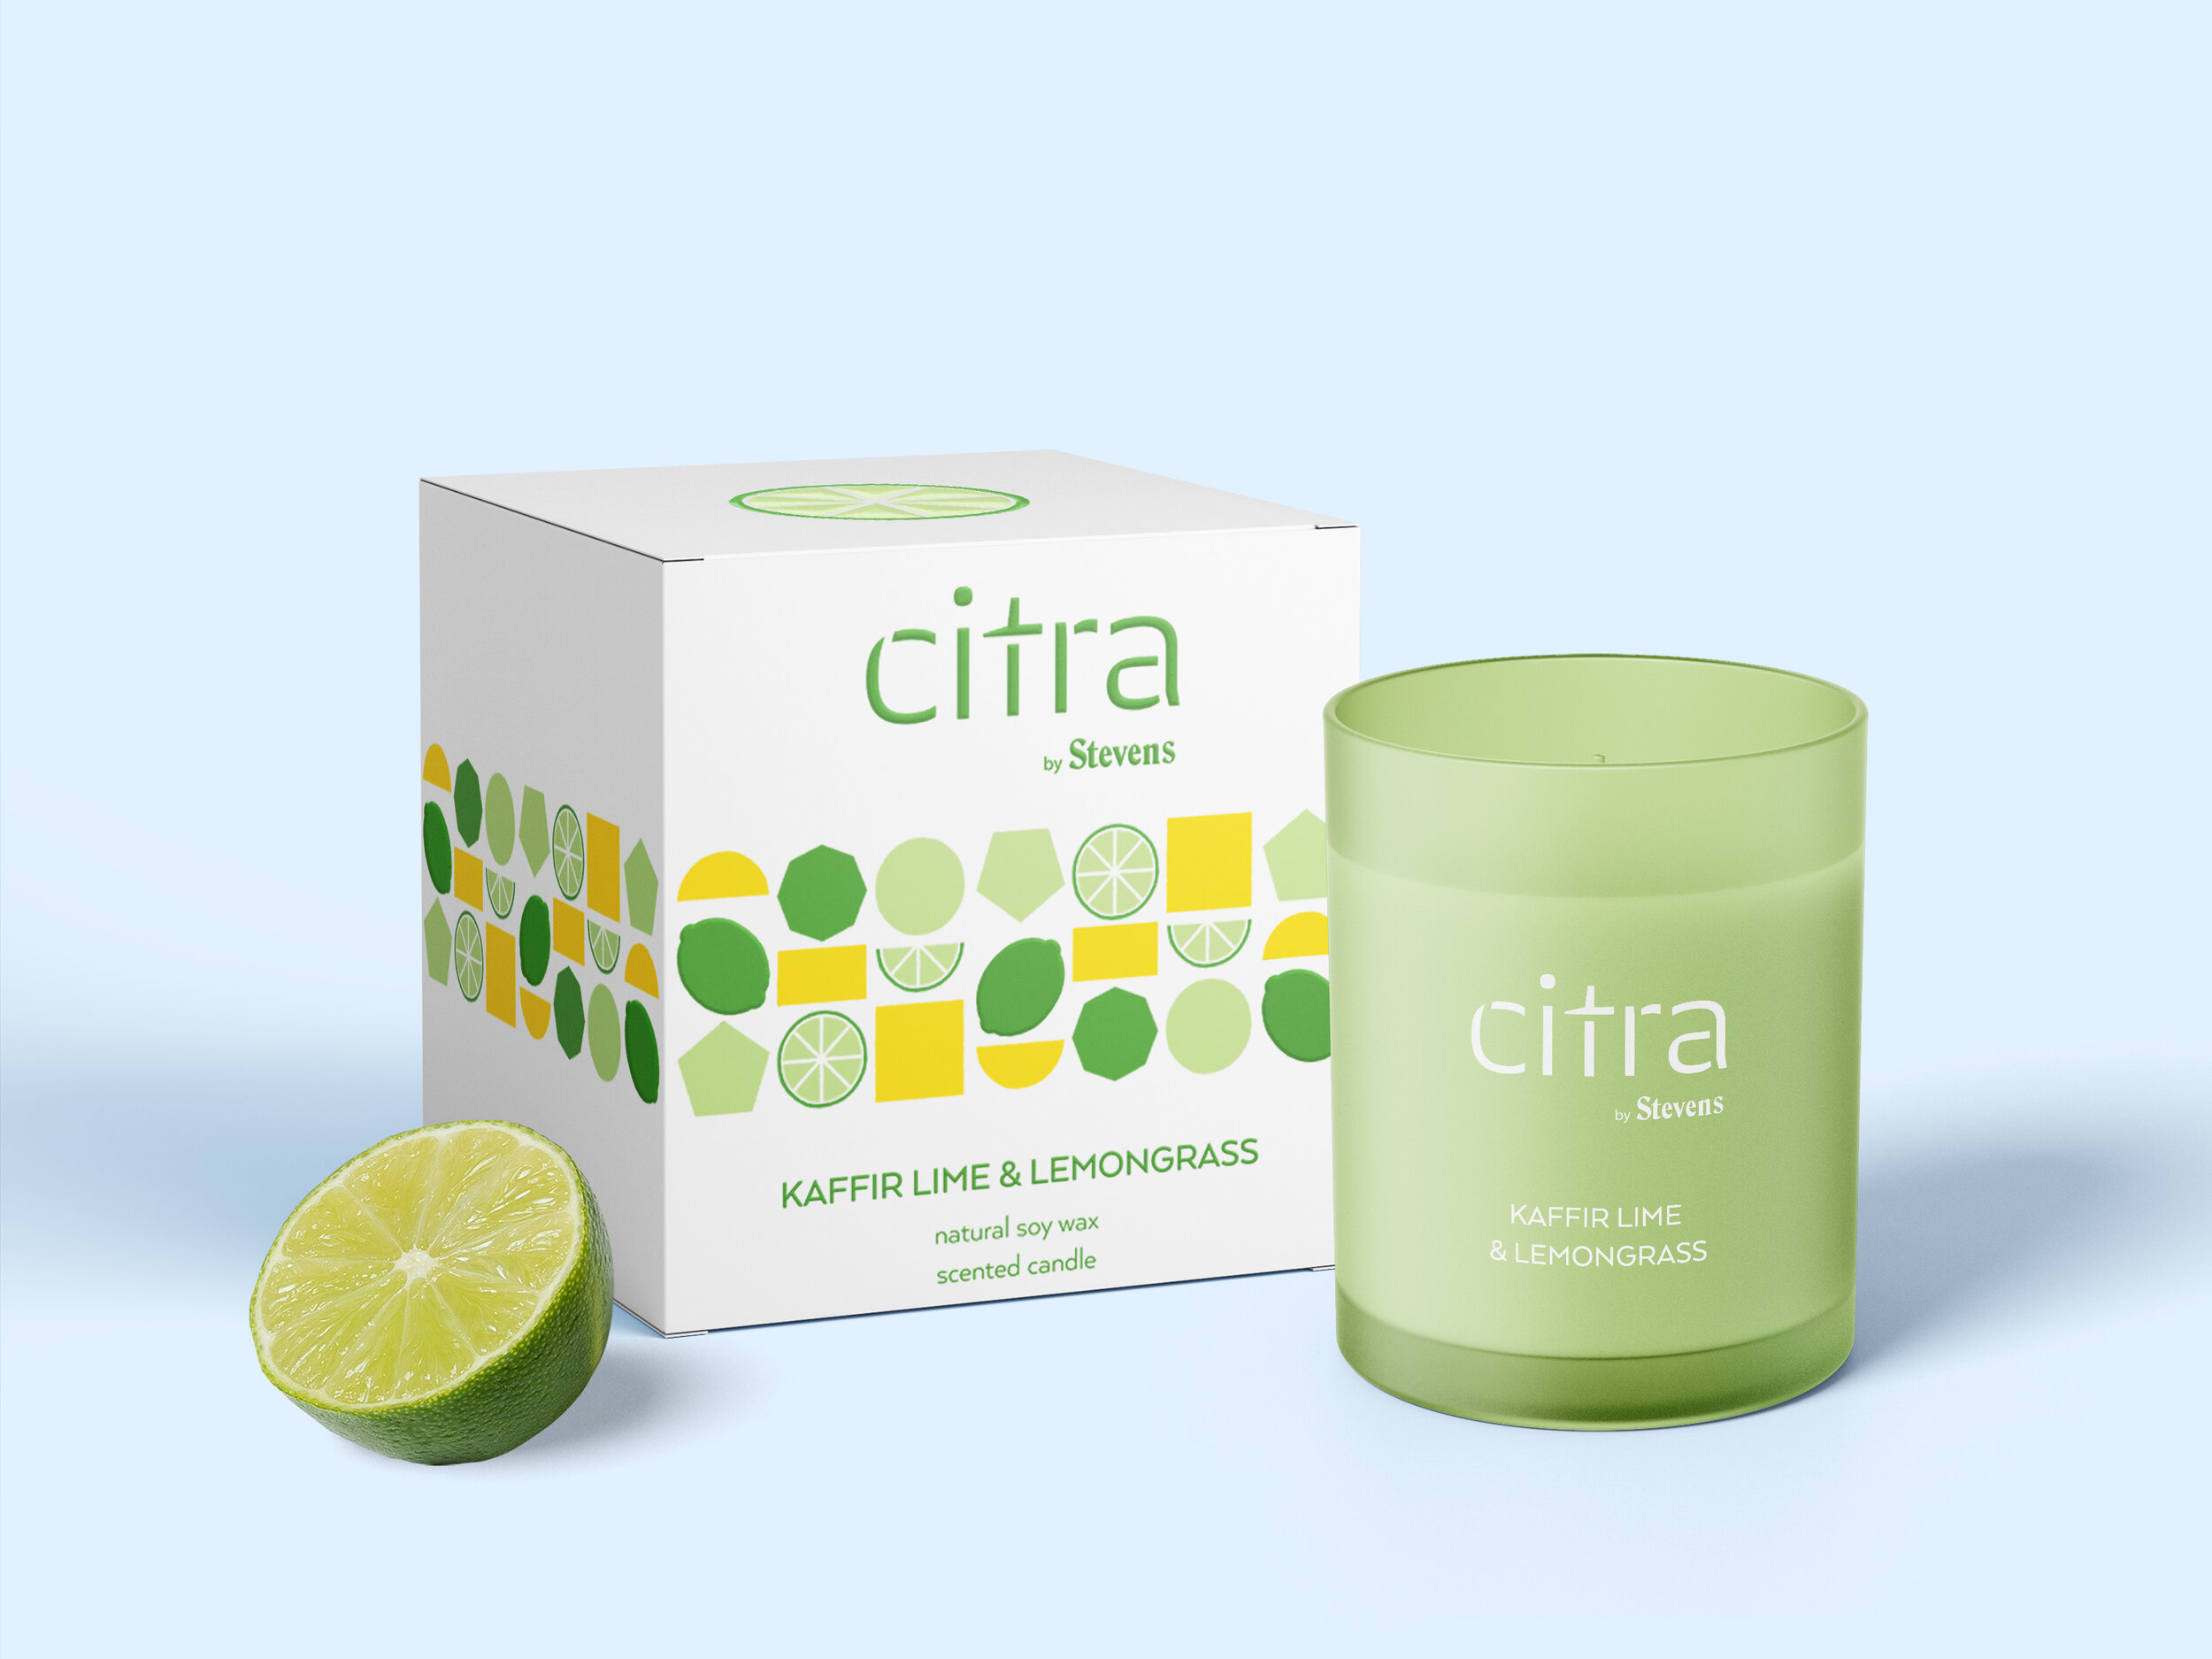 citra_lime-box-and-candle.jpg